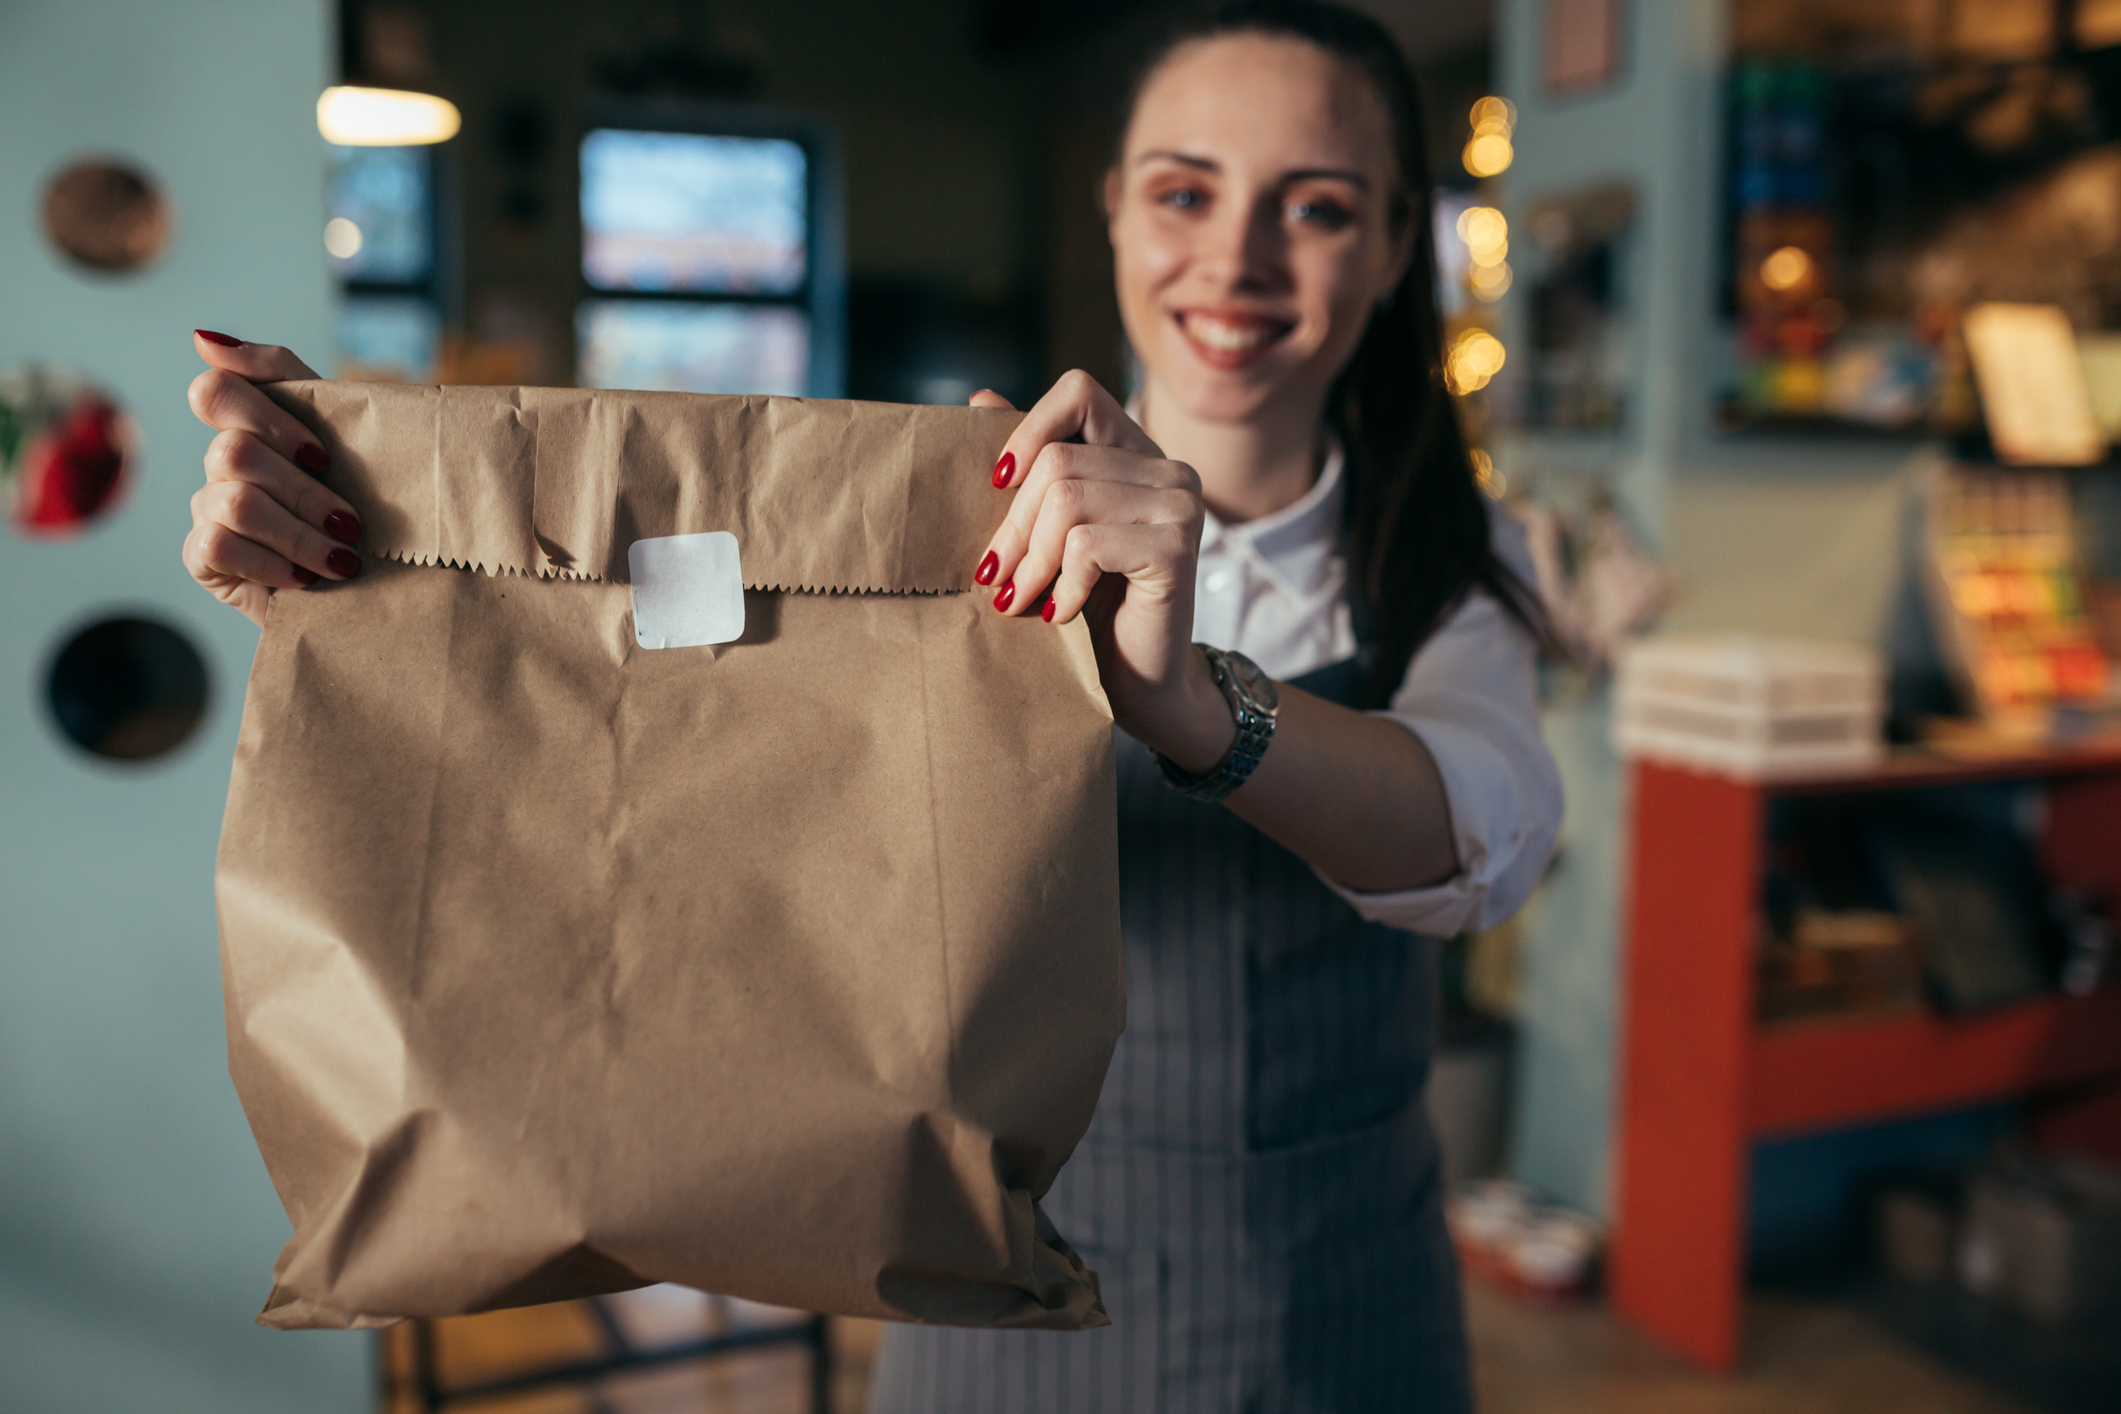 A woman holding up a brown bag